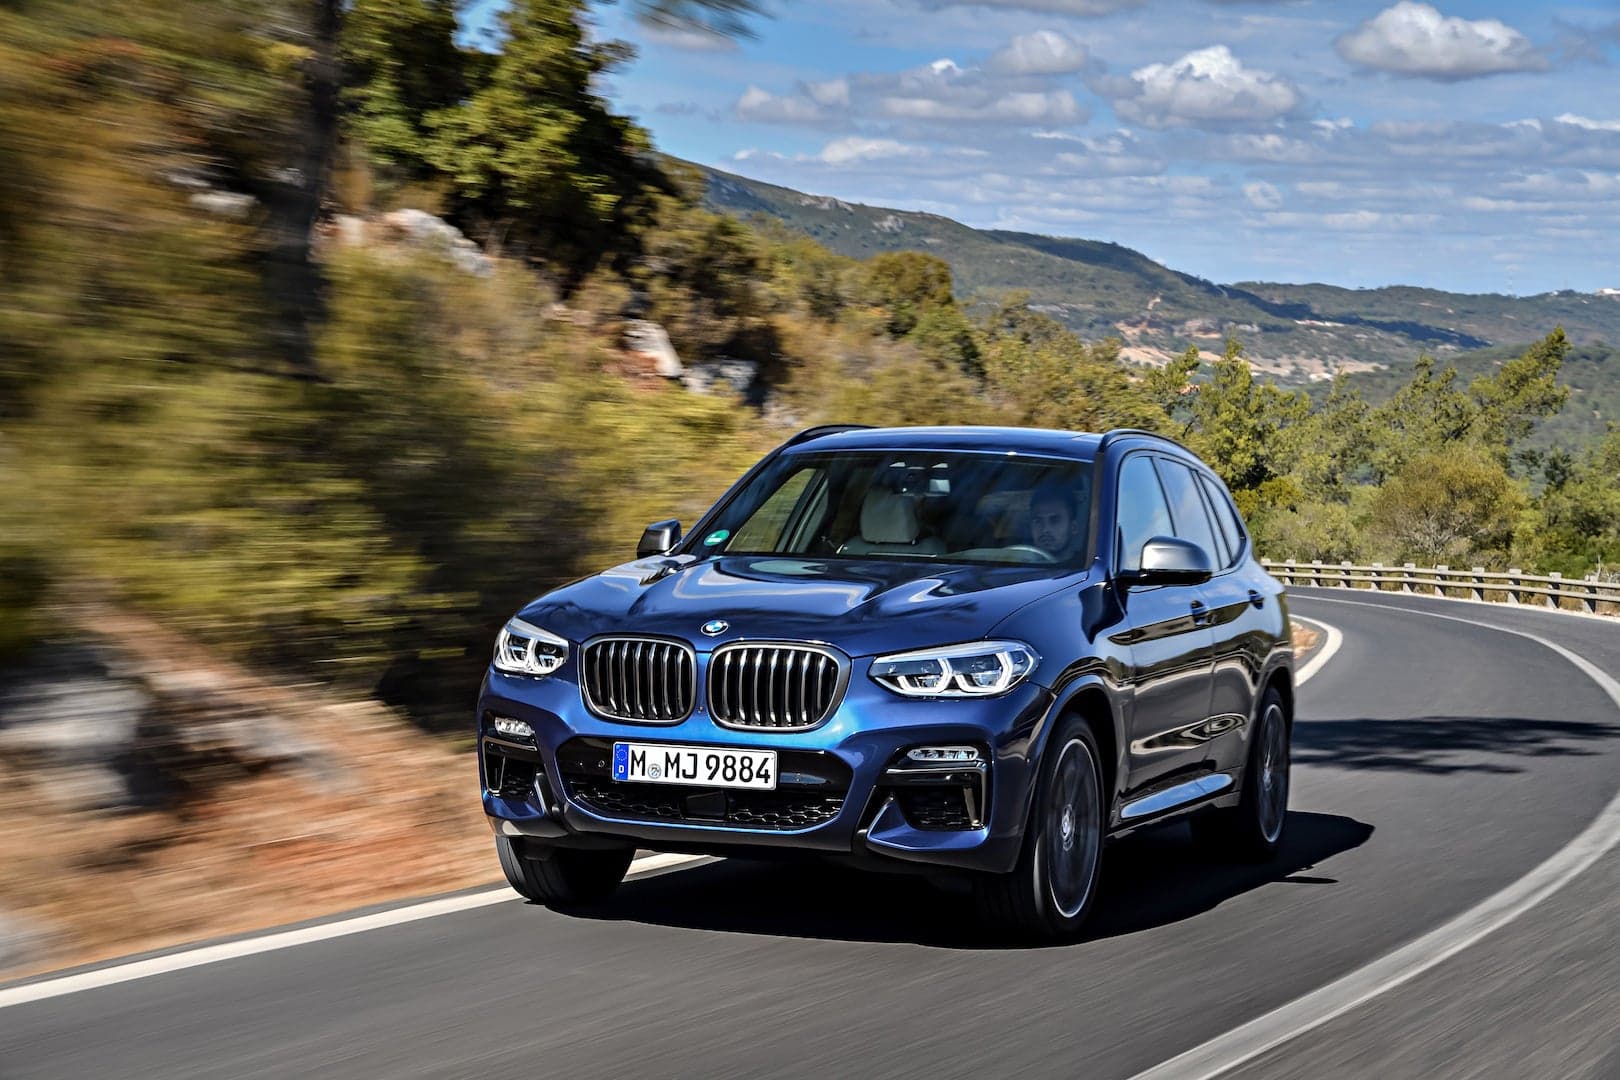 2018 BMW X3 M40i Review: Drag-Racing PTA Members, Your Ride Is Here